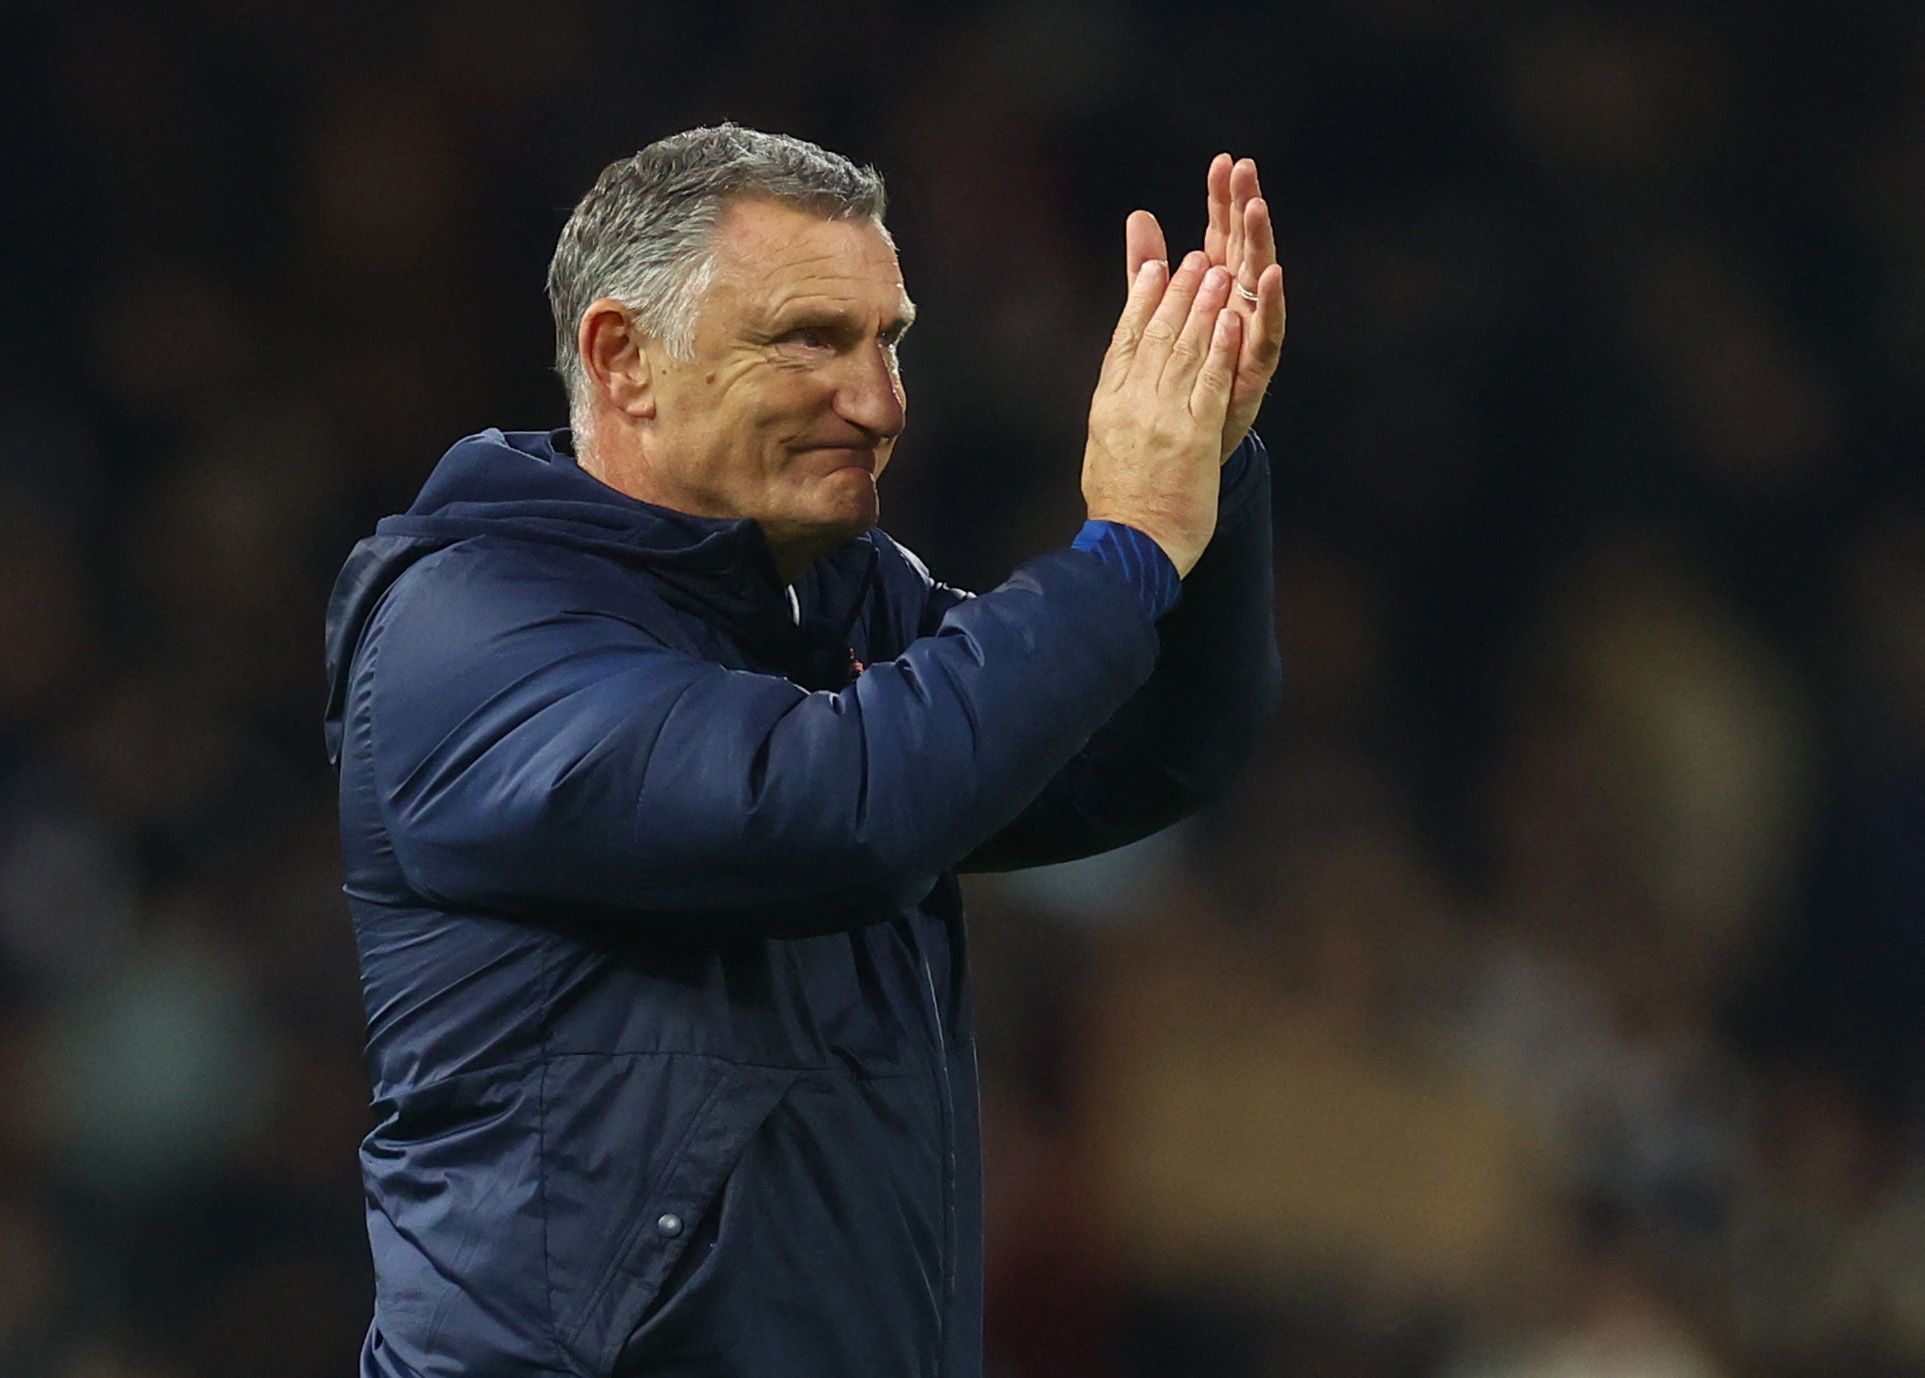 Soccer Football - FA Cup - Fourth Round - Fulham v Sunderland - Craven Cottage, London, Britain - January 28, 2023 Sunderland manager Tony Mowbray reacts after the match Action Images via Reuters/Paul Childs